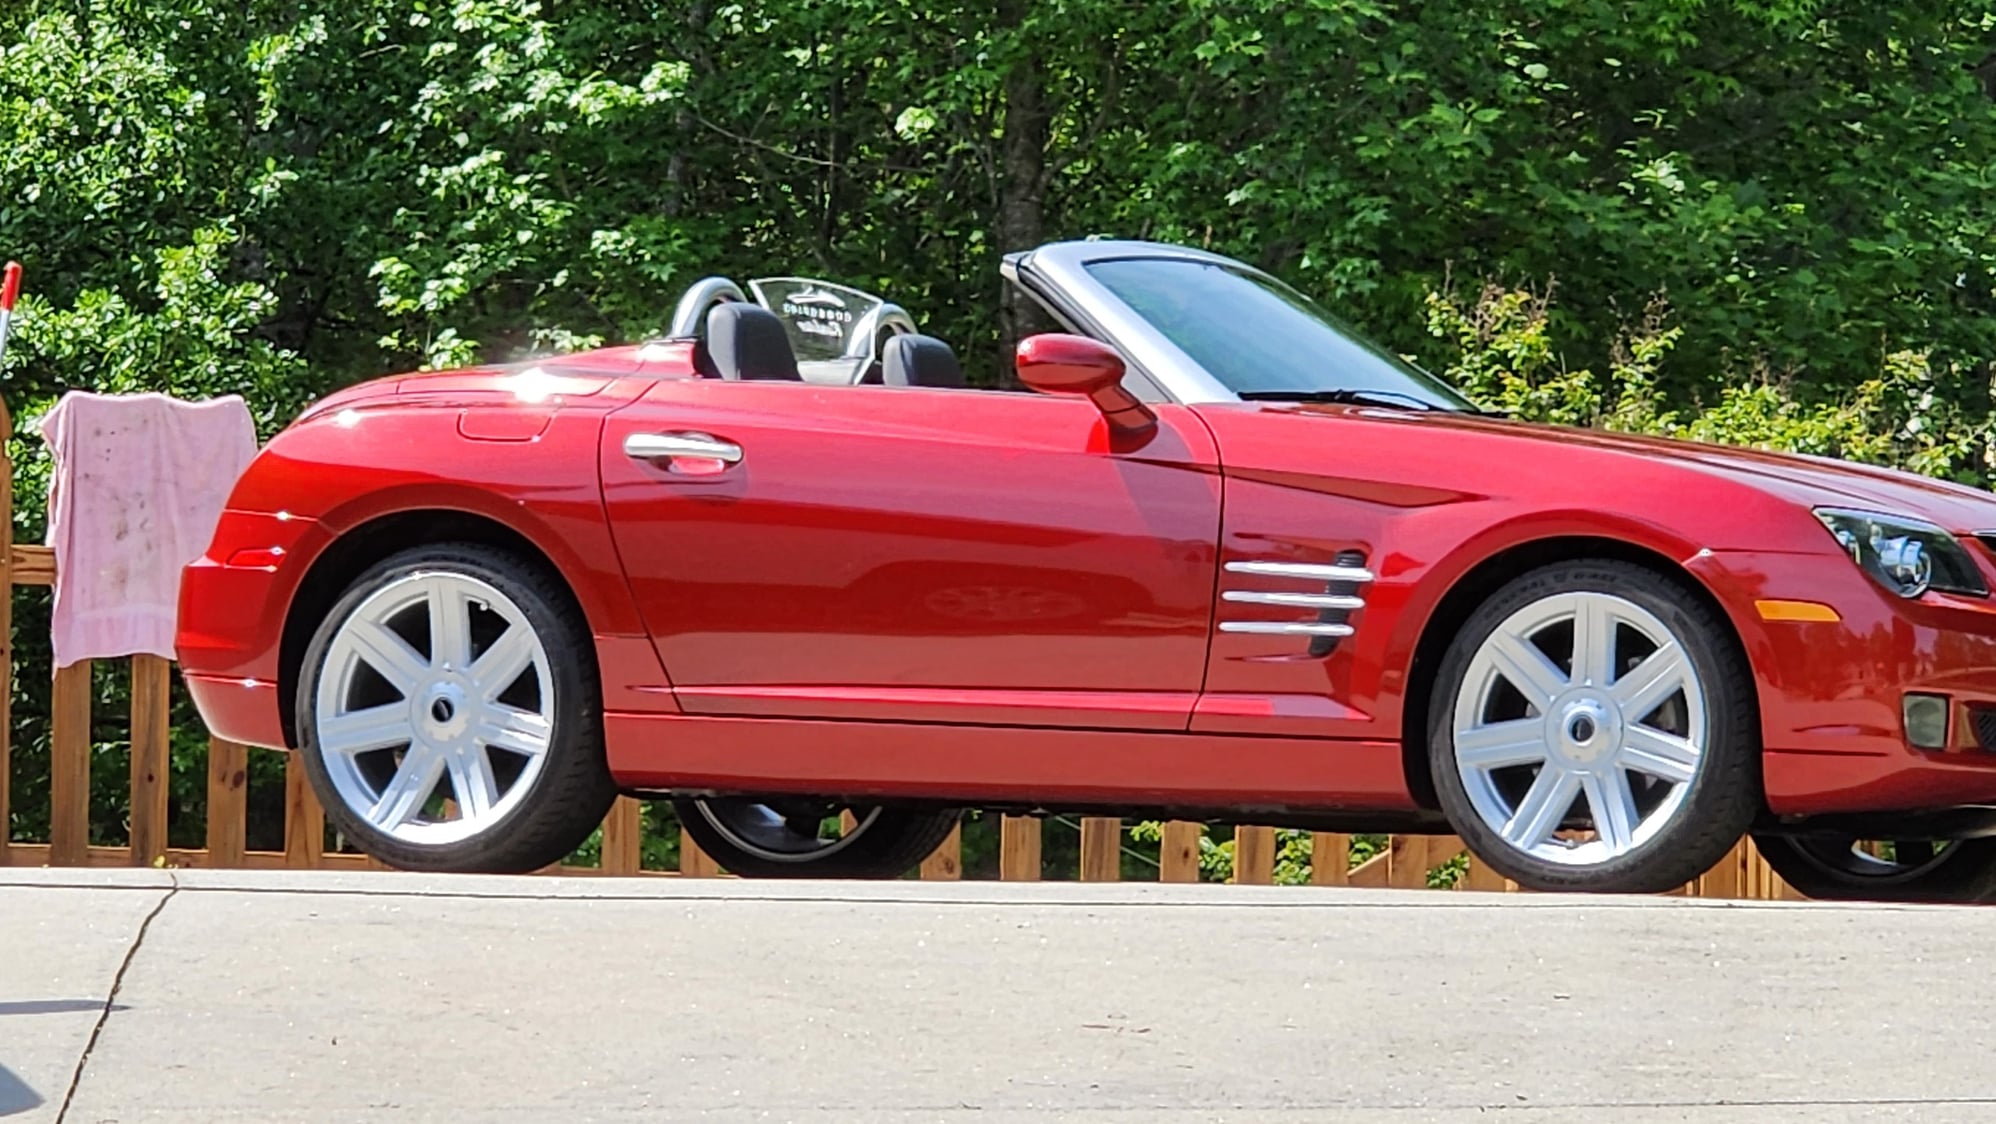 2005 Chrysler Crossfire - 2005 roadster limited-red crystal blaze metallic - Used - VIN 1C3AN65L45X024543 - 32,000 Miles - 6 cyl - 2WD - Automatic - Convertible - Red - Acworth, GA 30102, United States